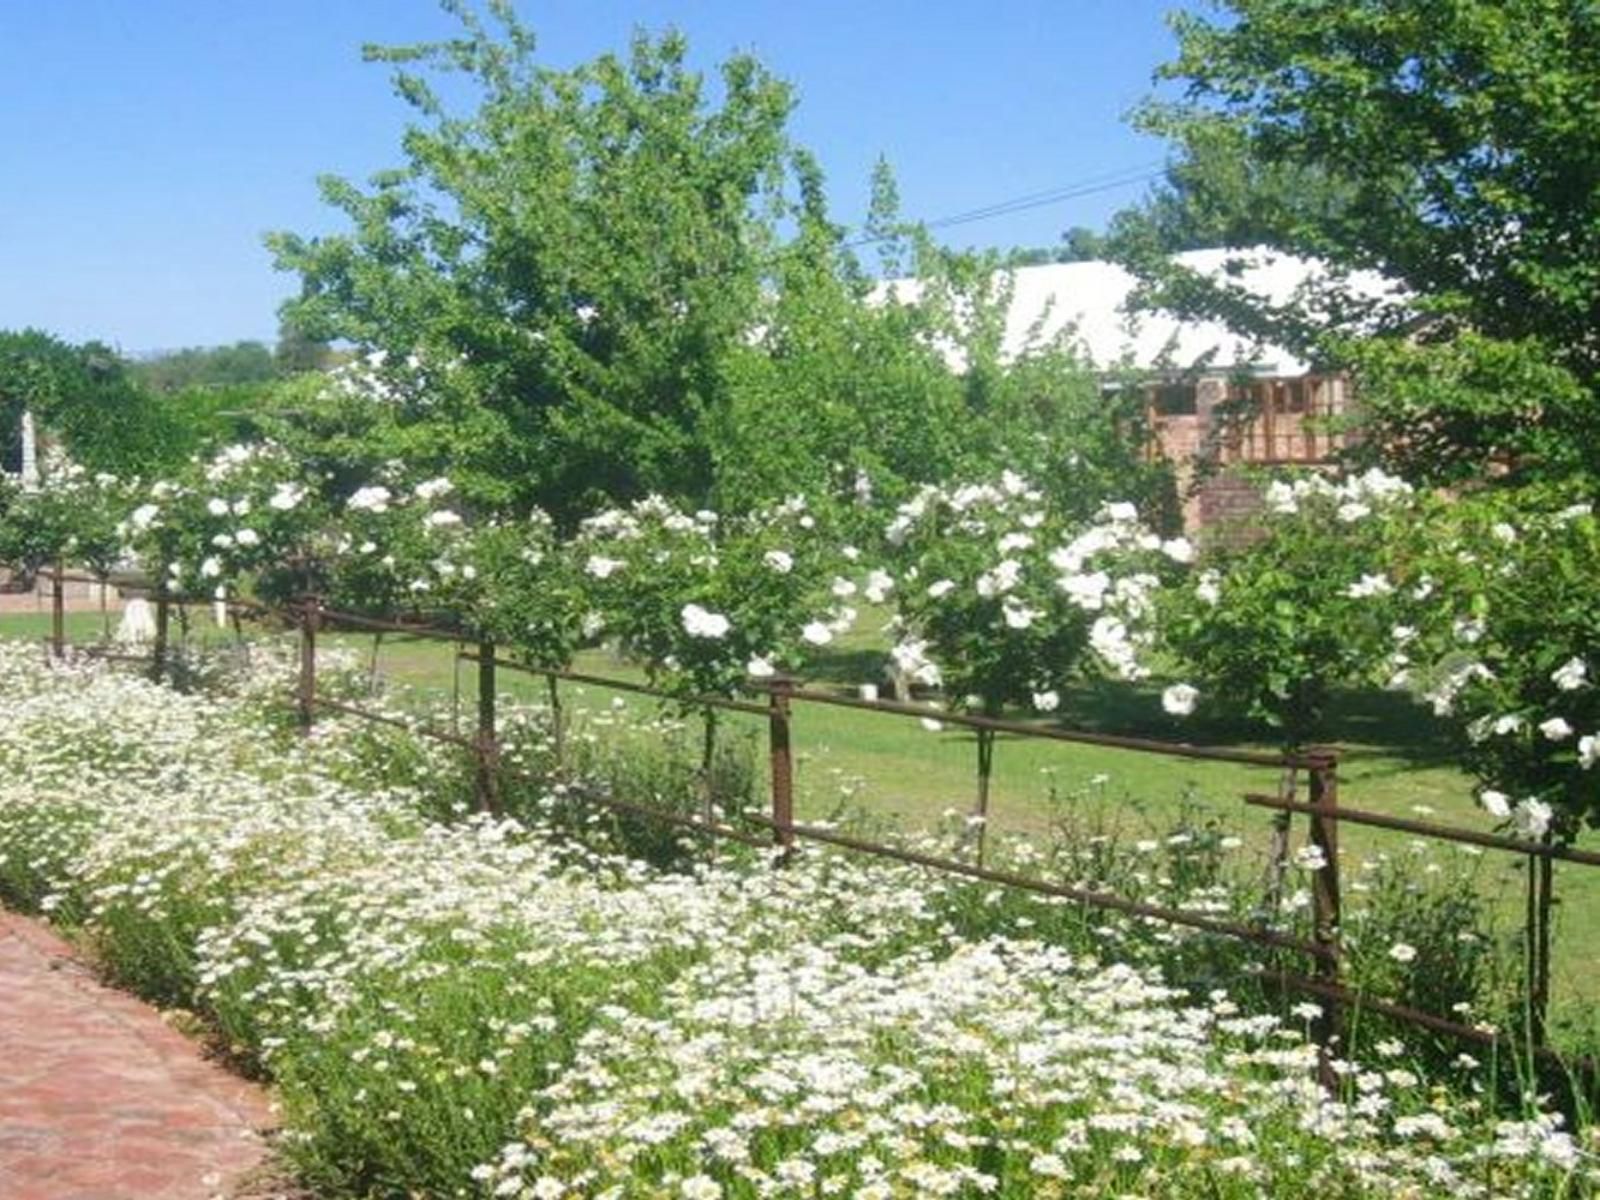 Gracias Guest House Mooivallei Park Potchefstroom North West Province South Africa Blossom, Plant, Nature, Flower, Garden